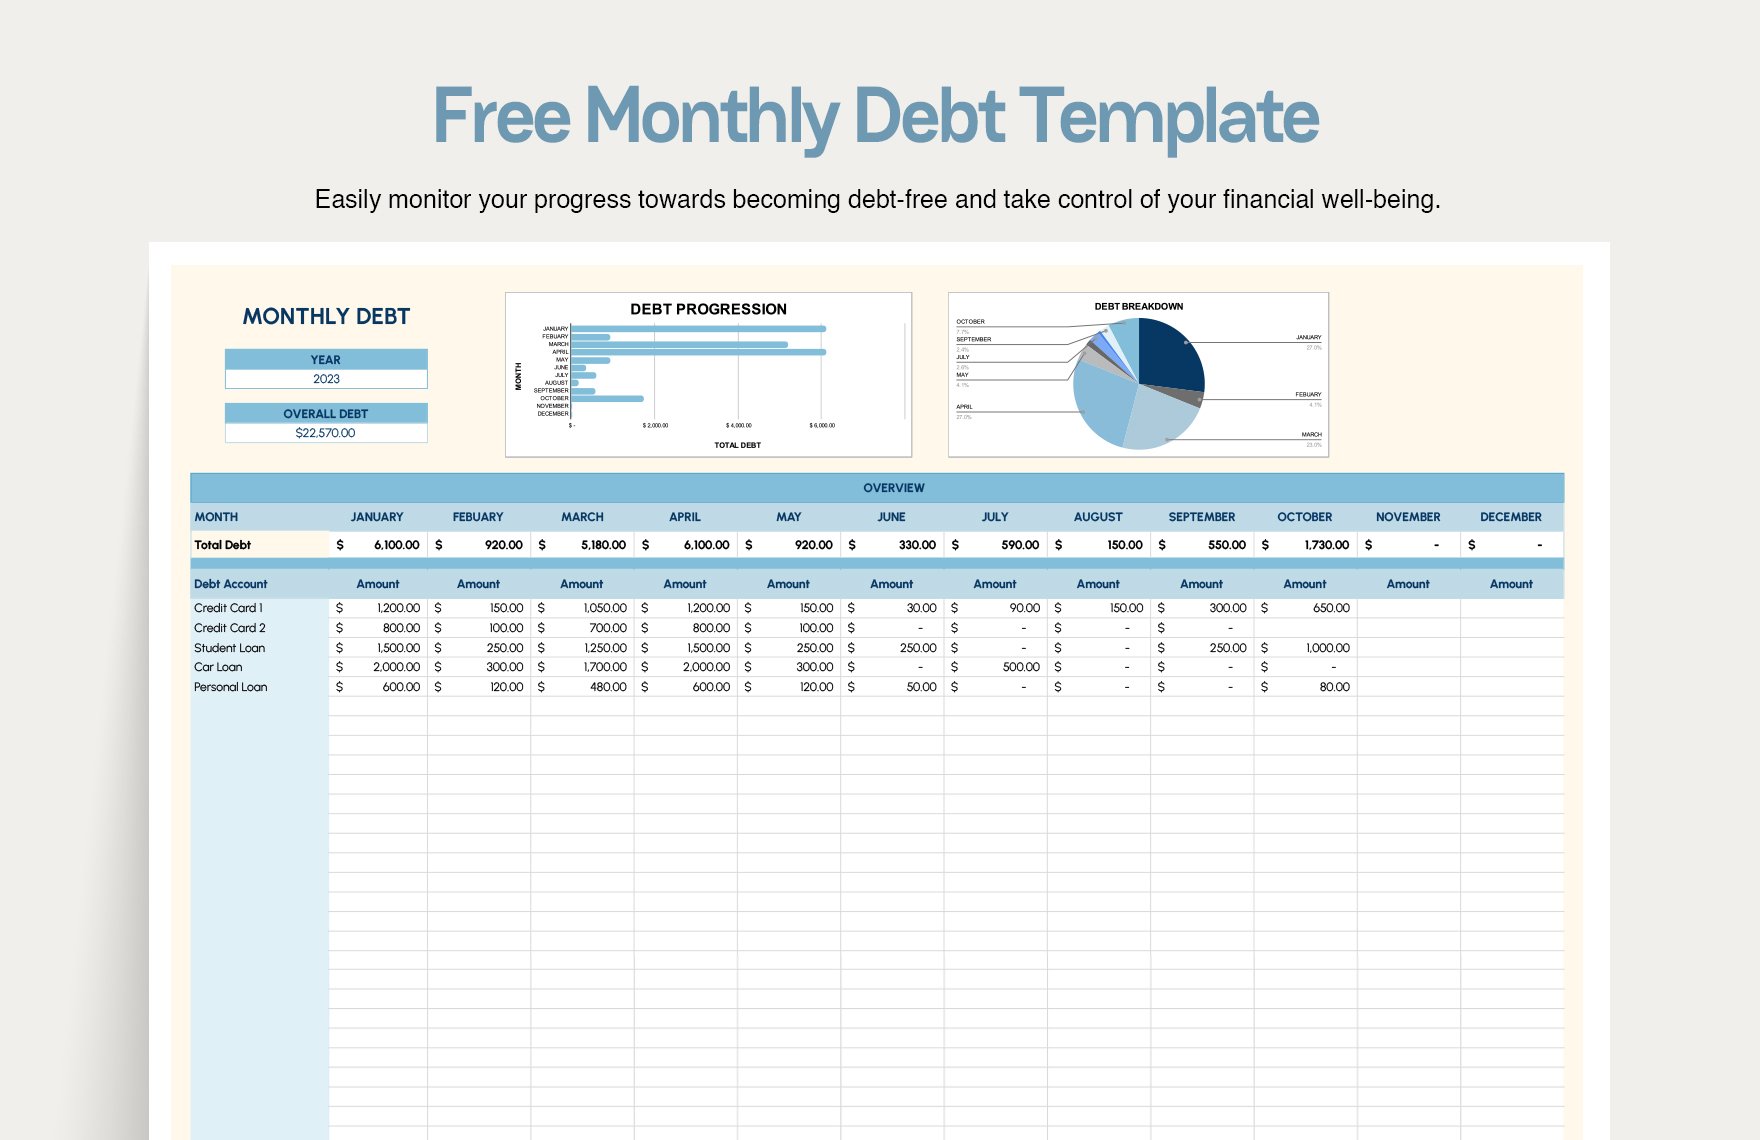 Free Monthly Debt Template